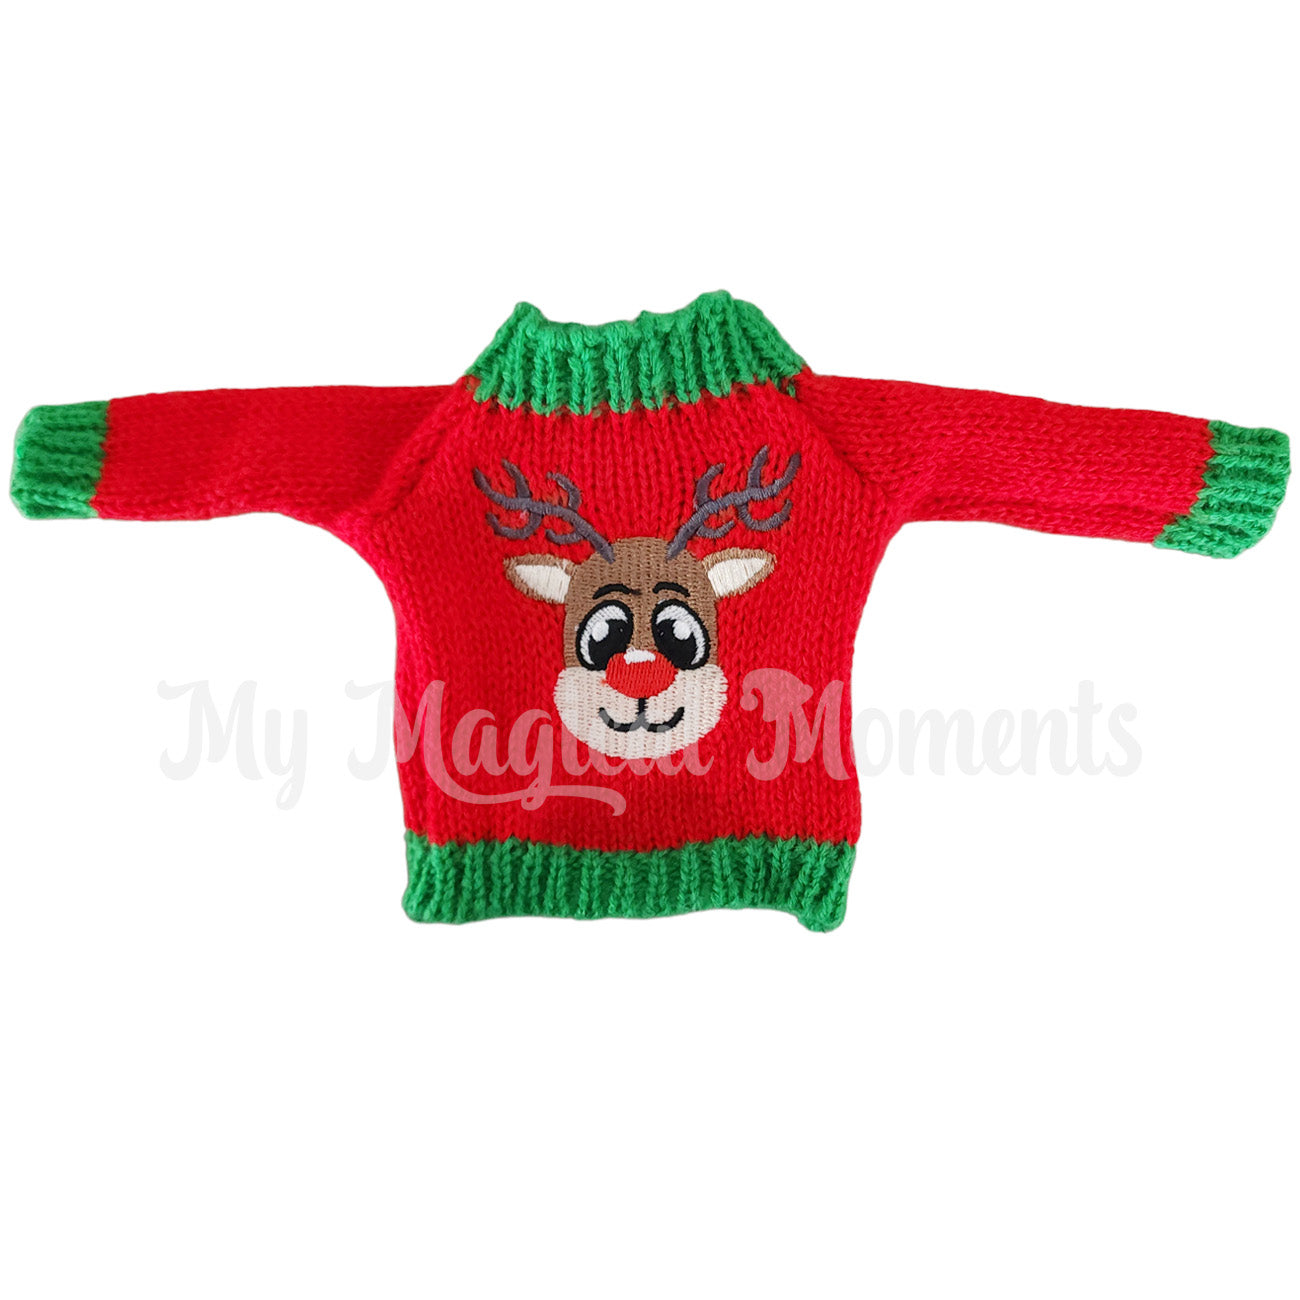 Red knitted elf sweater with reindeer pattern